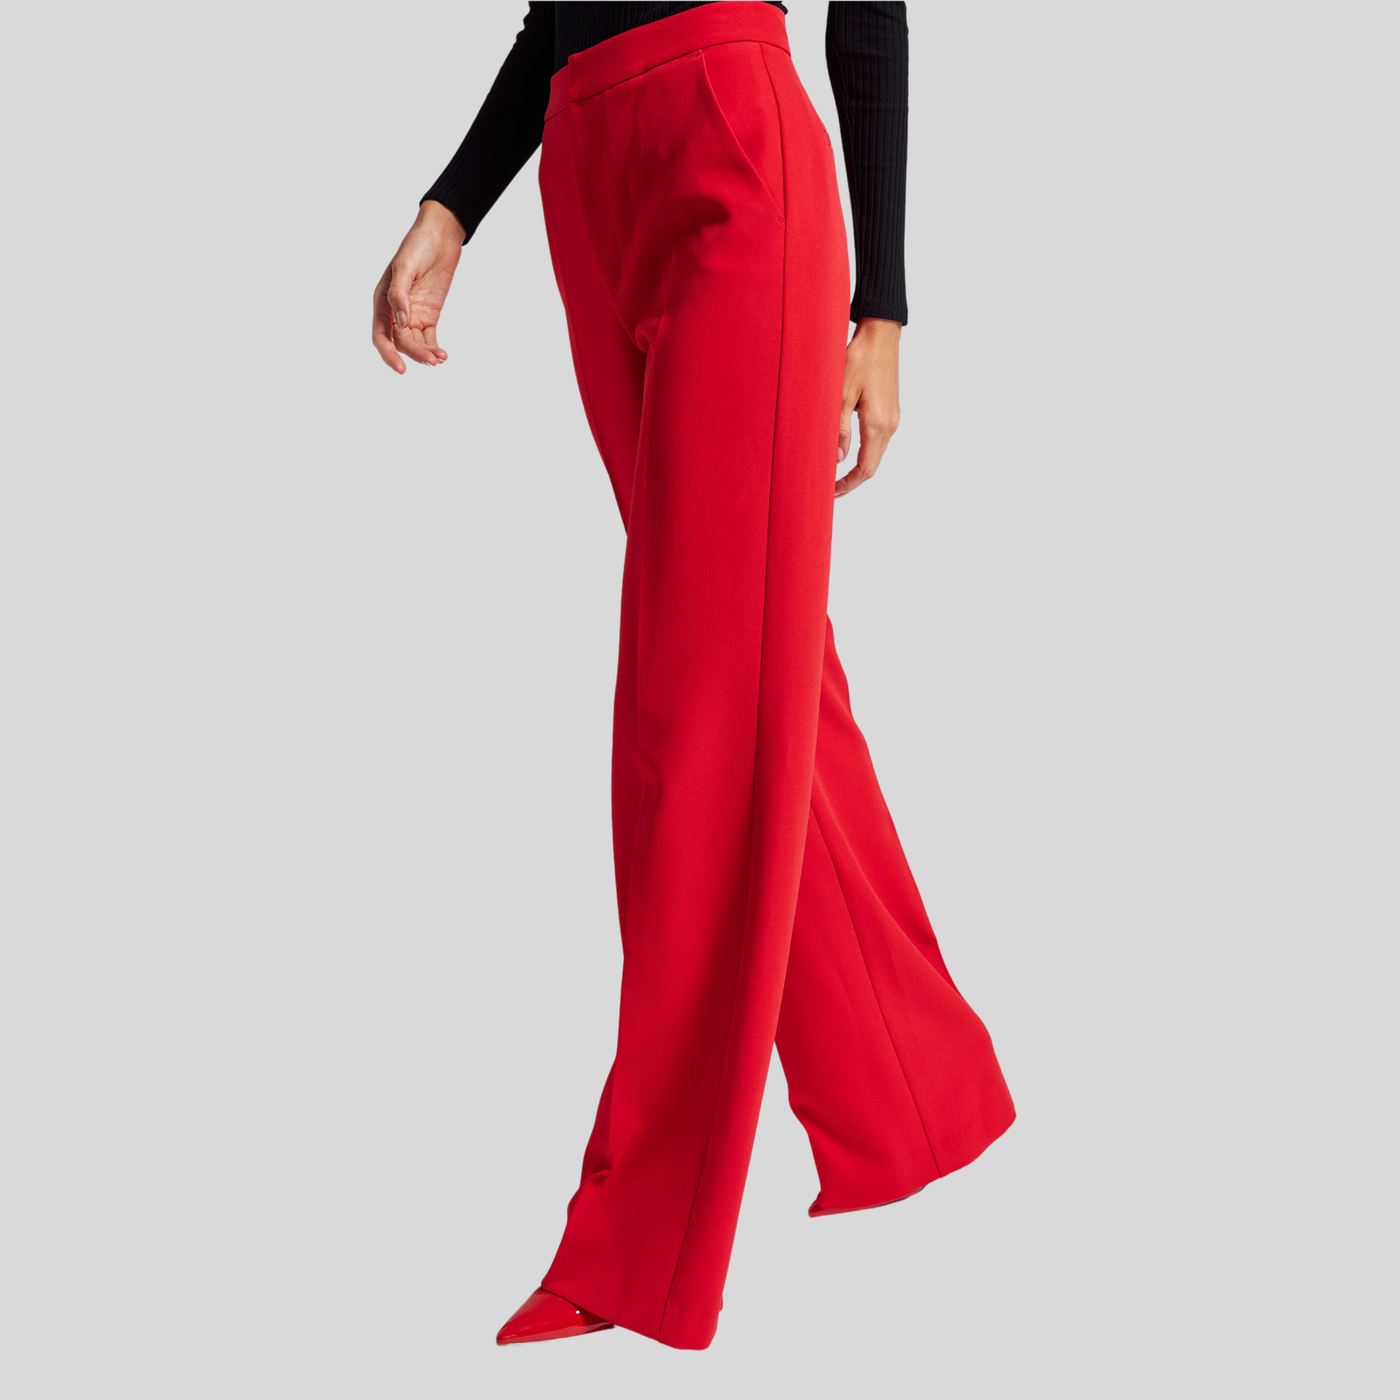 Gotstyle Fashion - Generation Love Pants Flared Crepe Pants - Red